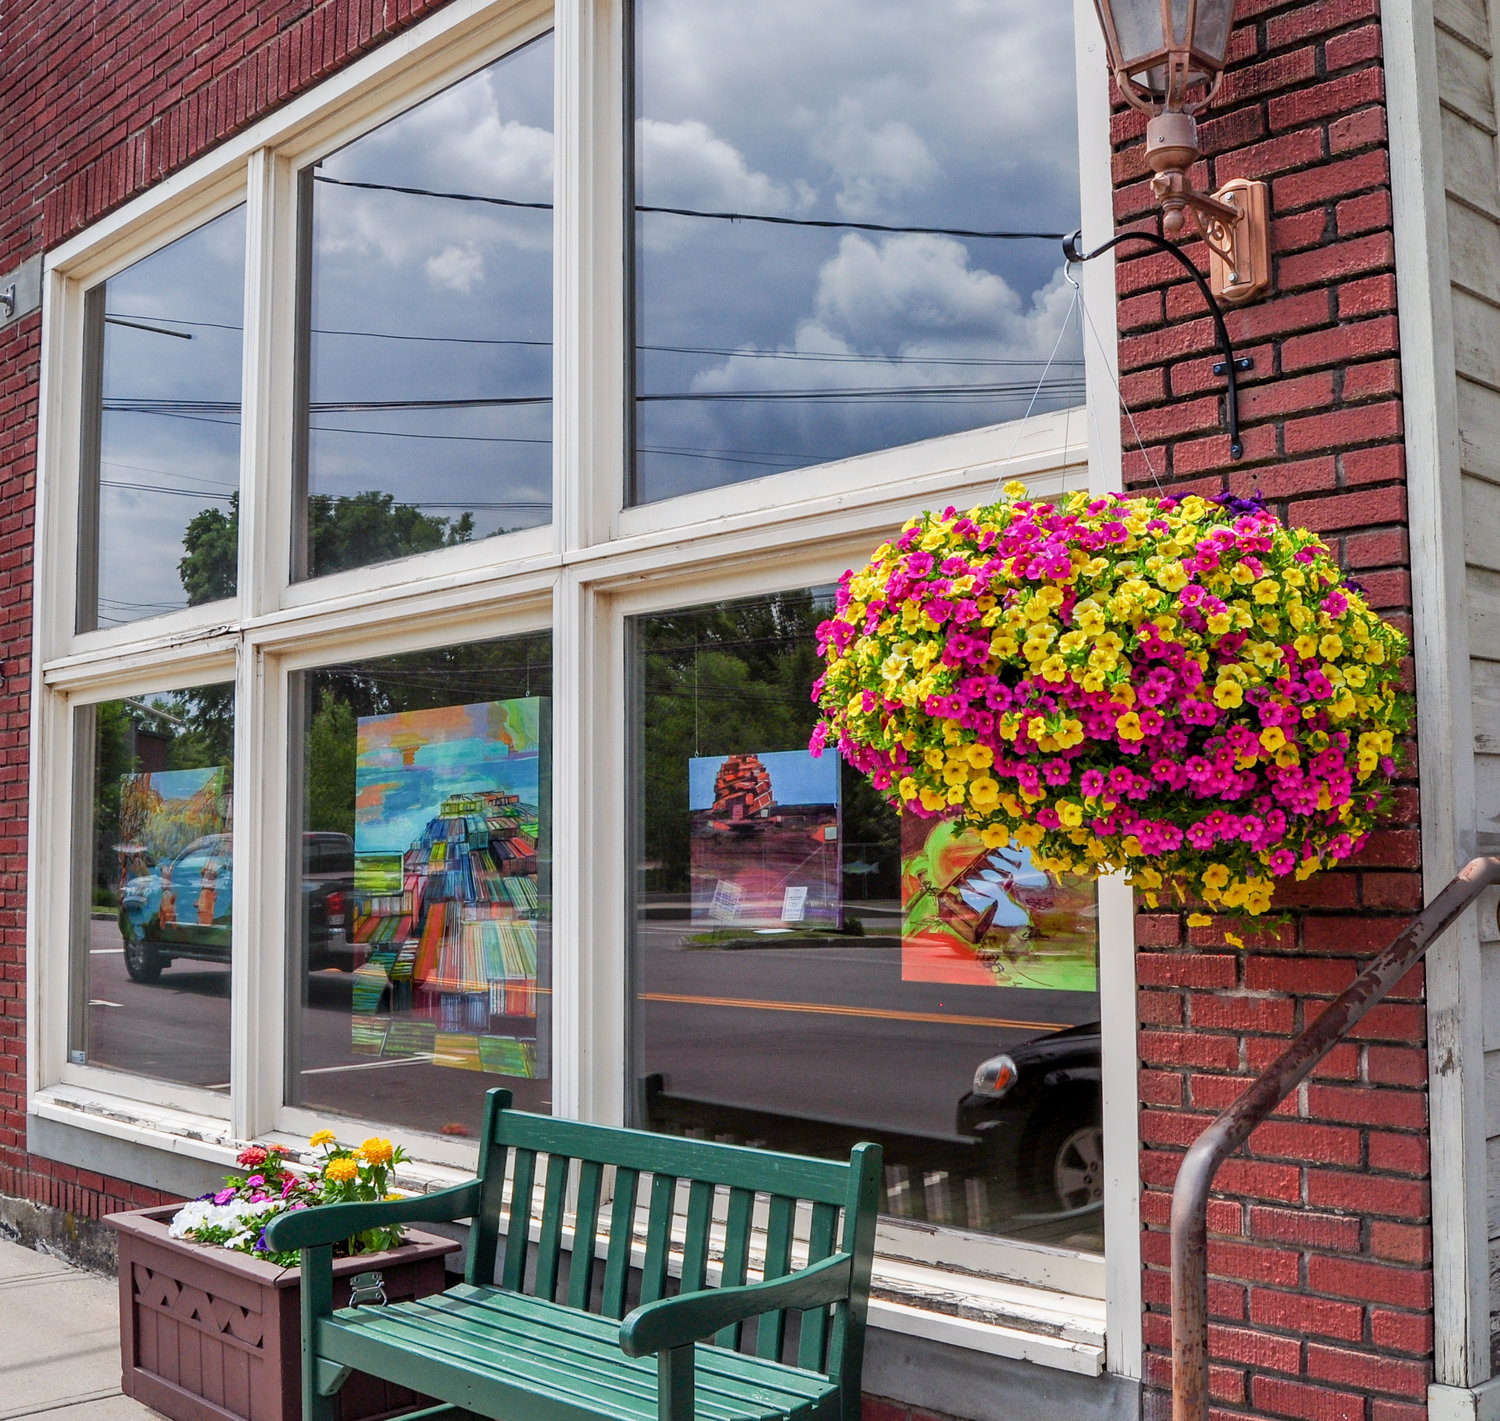 Colorful works of art line the windows in Livingston Manor’s Catskill Art Society, complimented by equally colorful flowers hanging in baskets all along Main Street. Gorgeous!